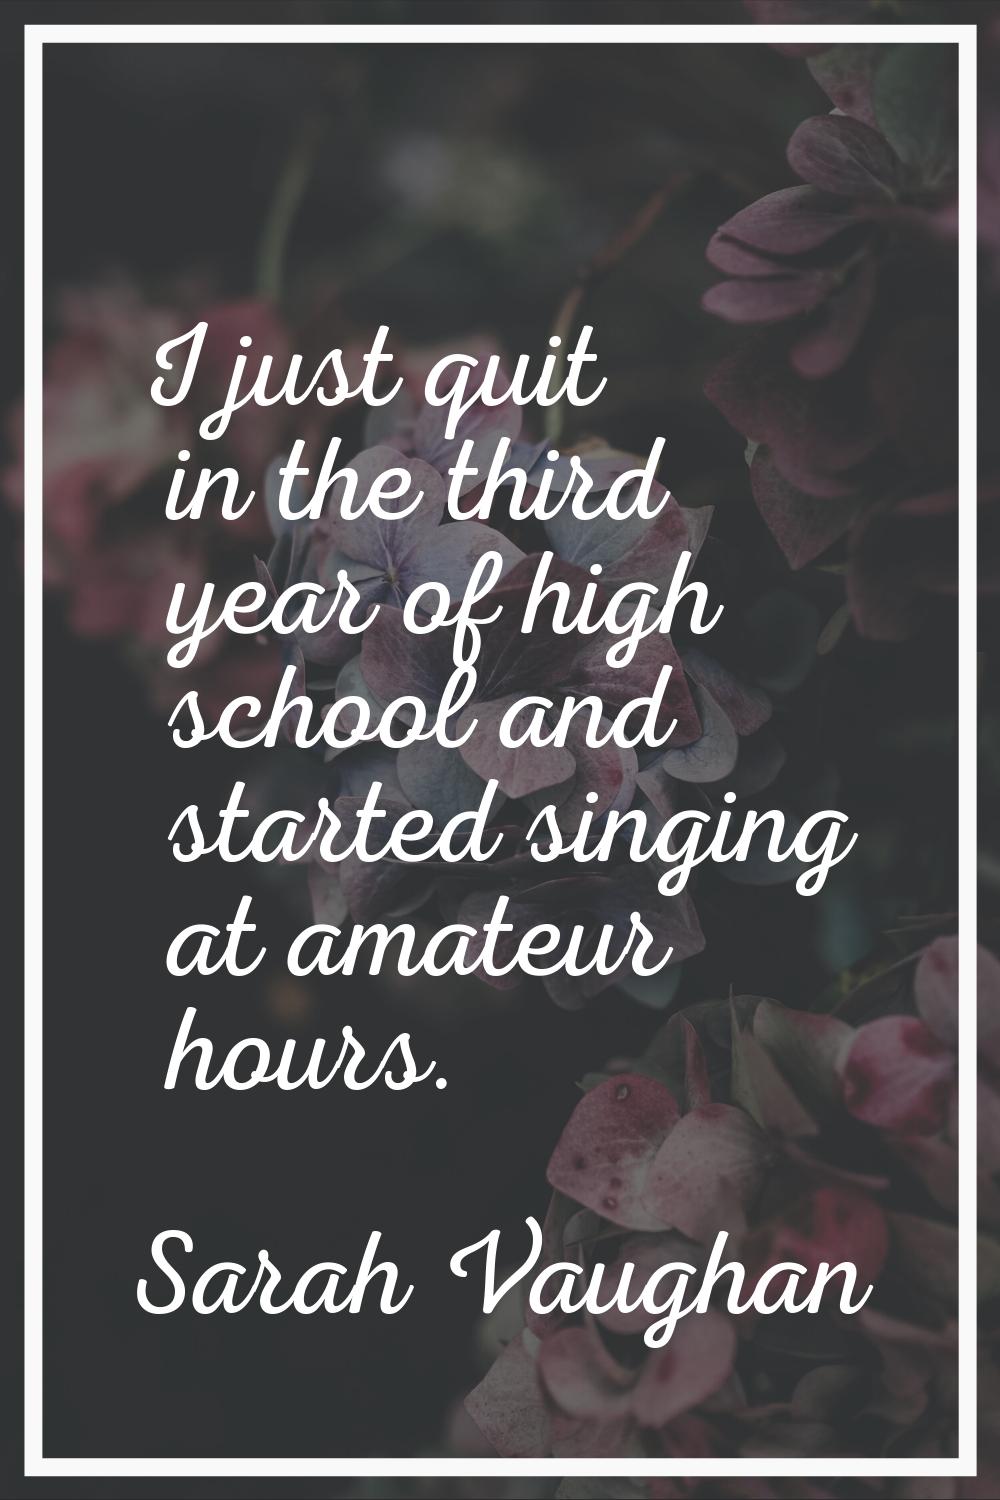 I just quit in the third year of high school and started singing at amateur hours.